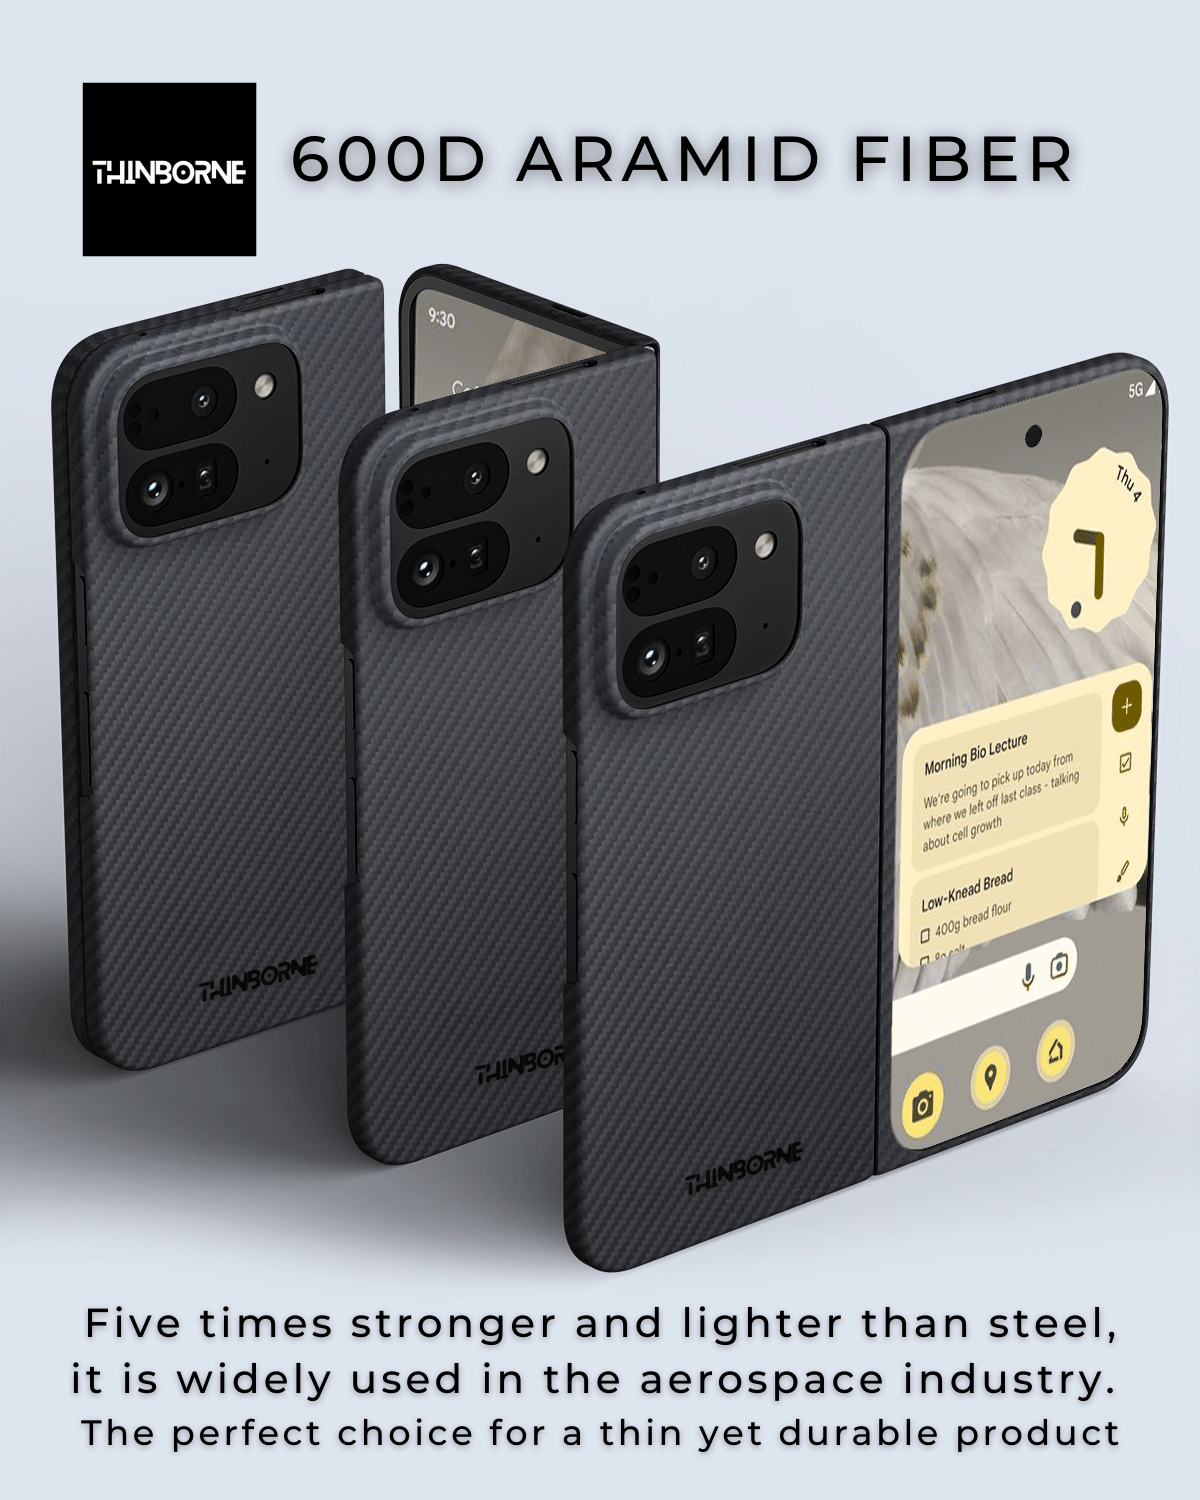 showing different angles of the aramid fiber pixel fold 2 case